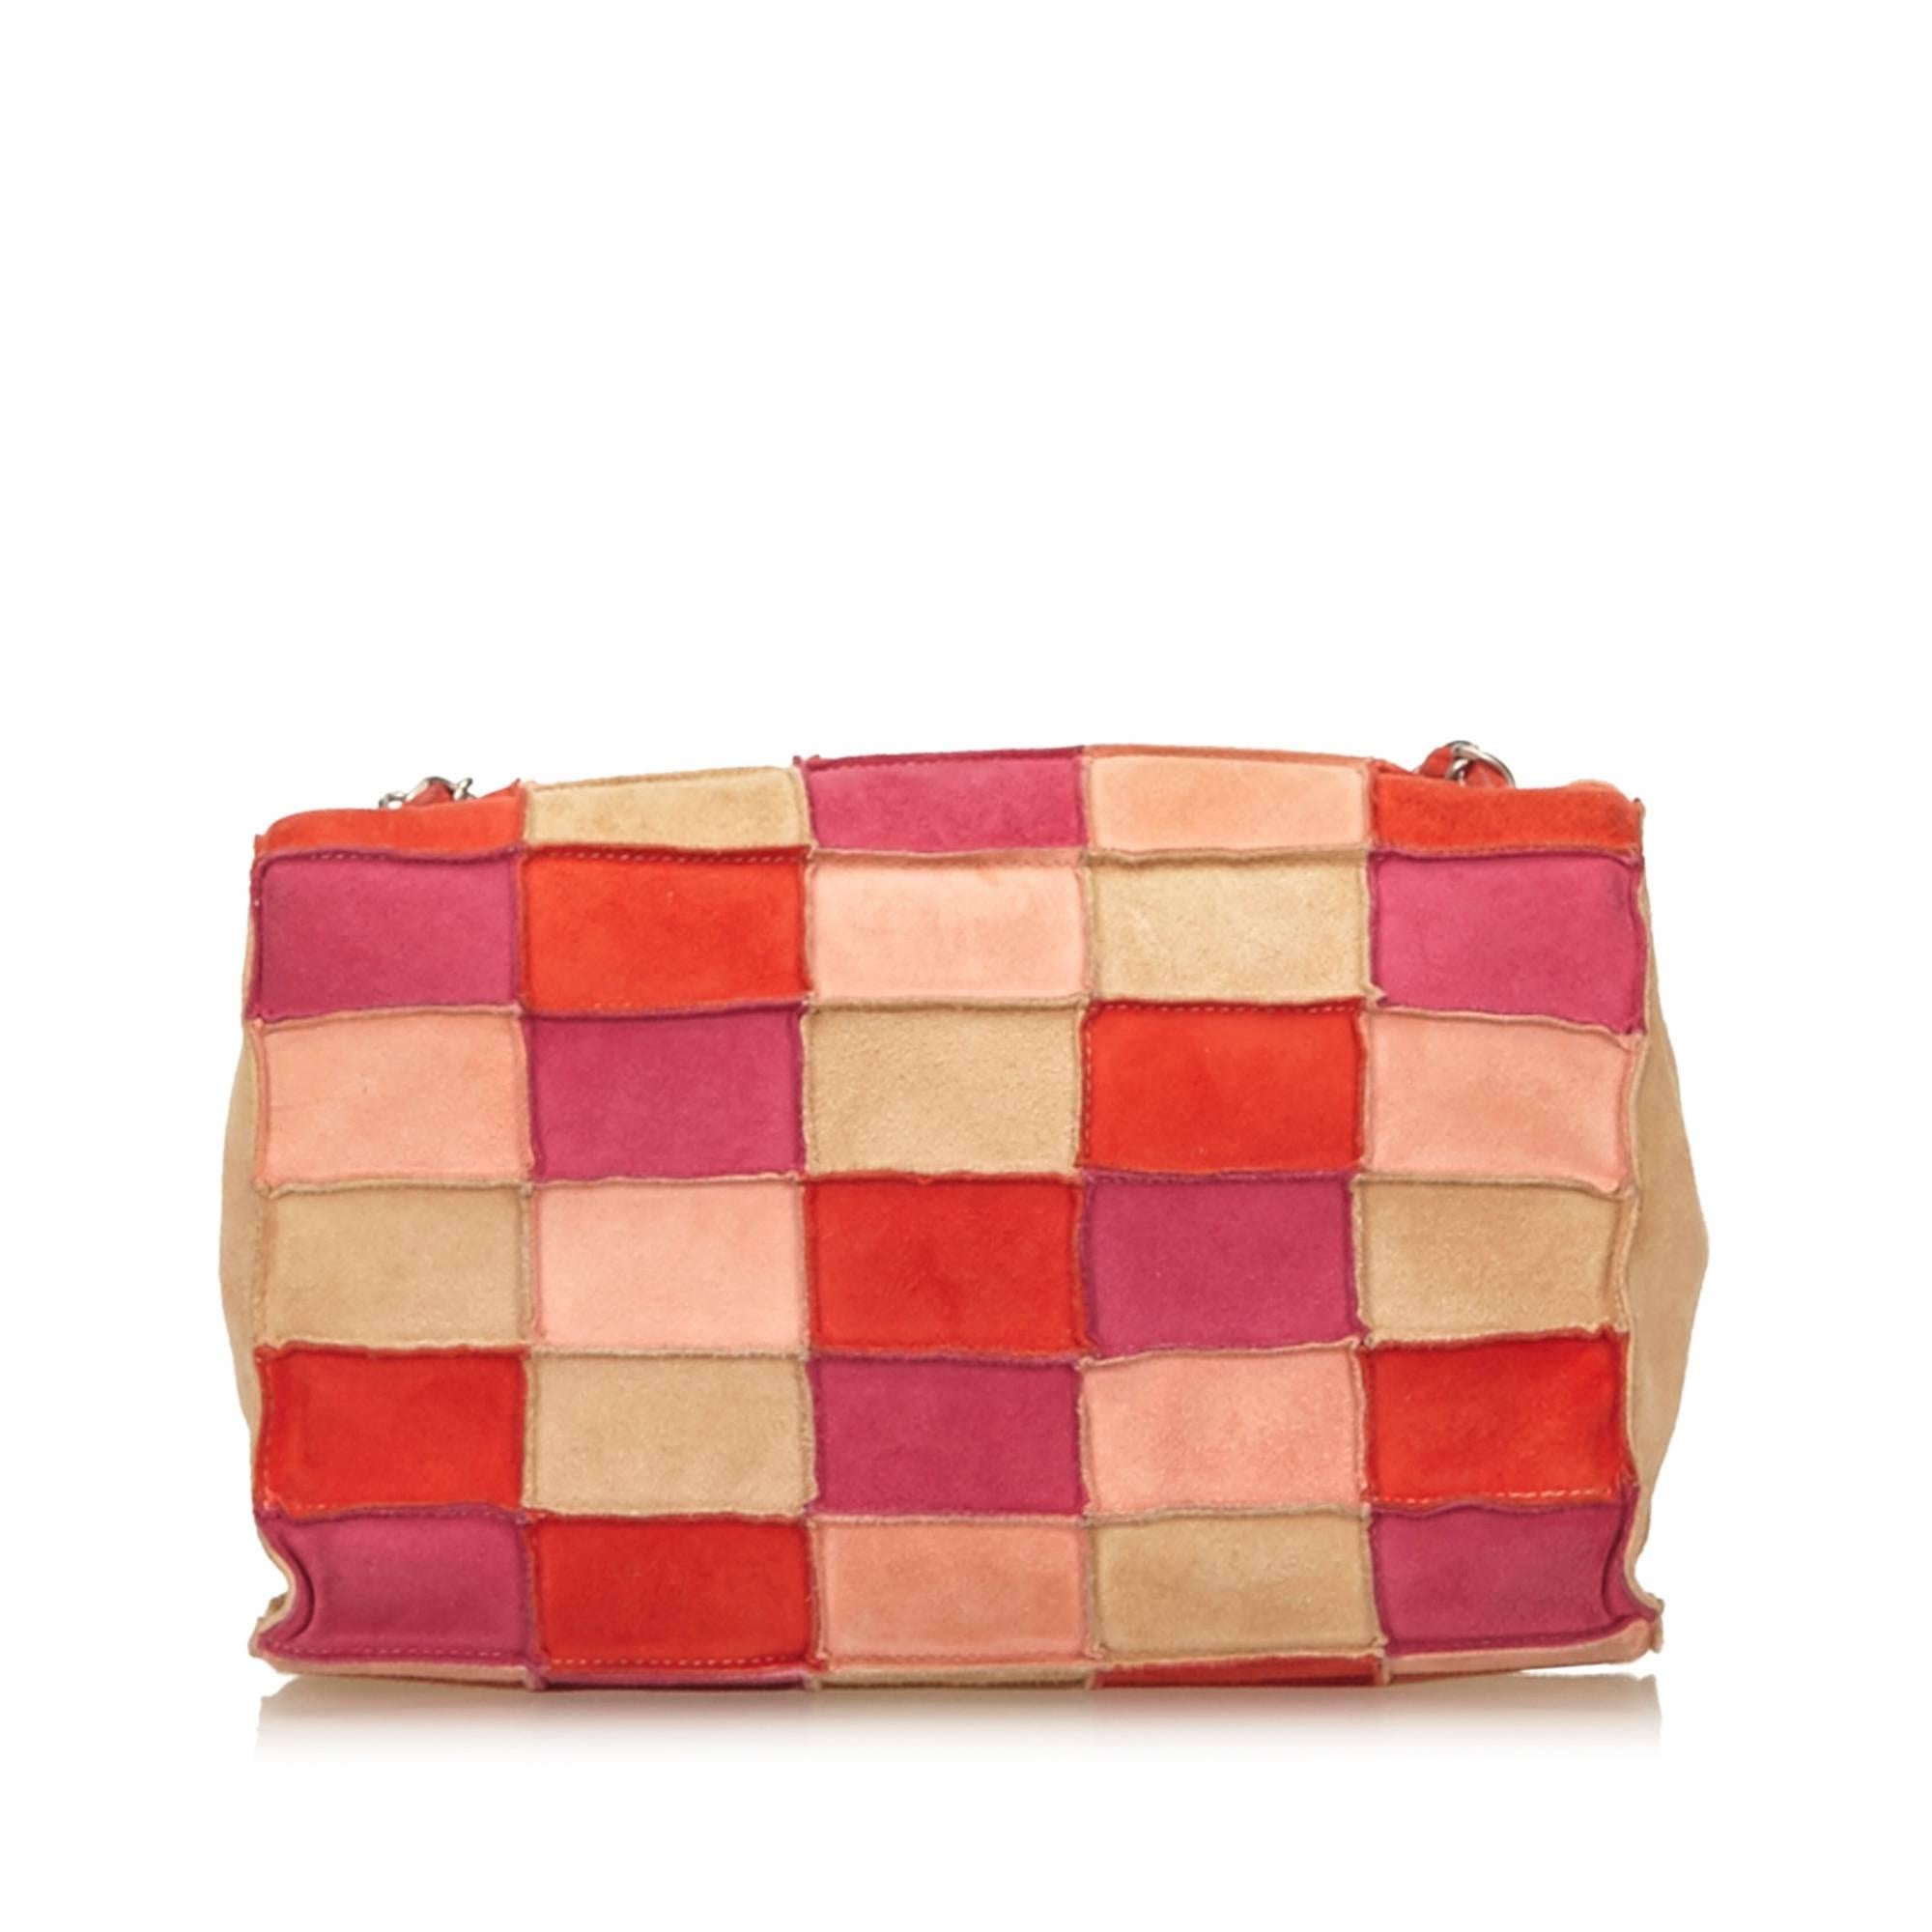 Women's Chanel Suede & Leather Patchwork Bag